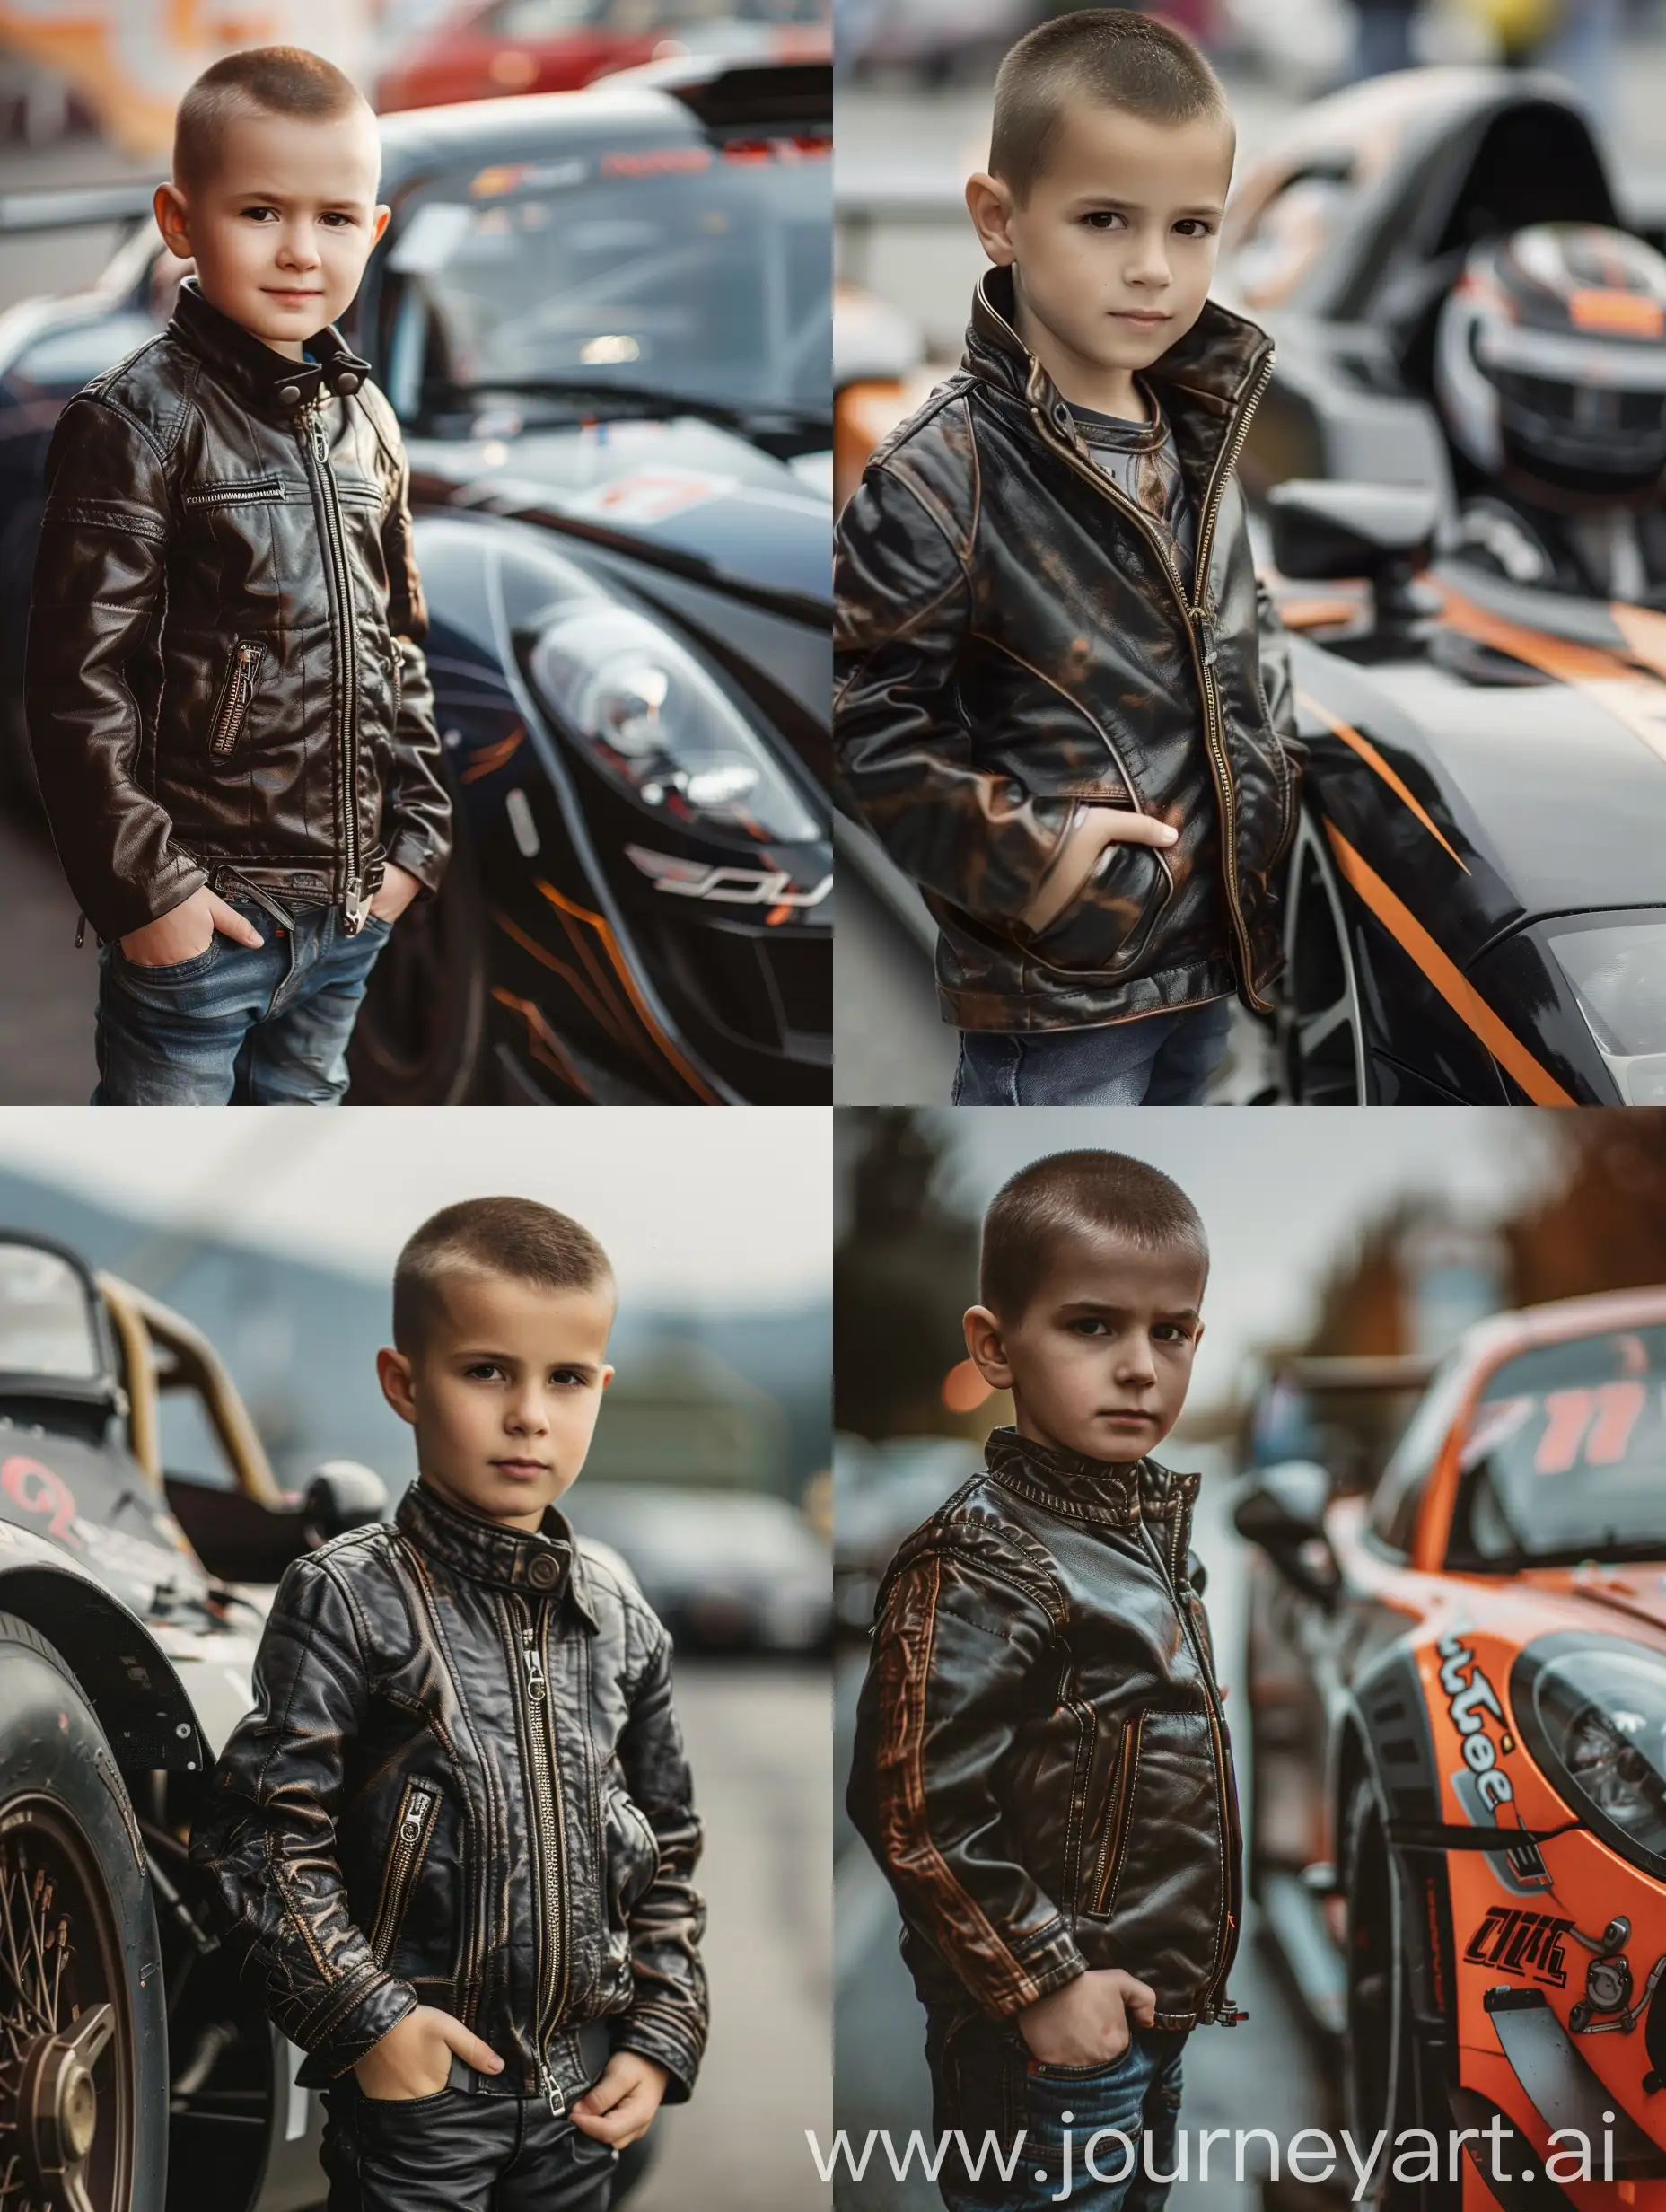 A little boy with short hair, dressed in a leather jacket, seven years old, hands in pockets, standing next to a coolly tuned racing car, street racing, realistic photography, hyperrealism, face clearly visible, looking at the camera, view from afar